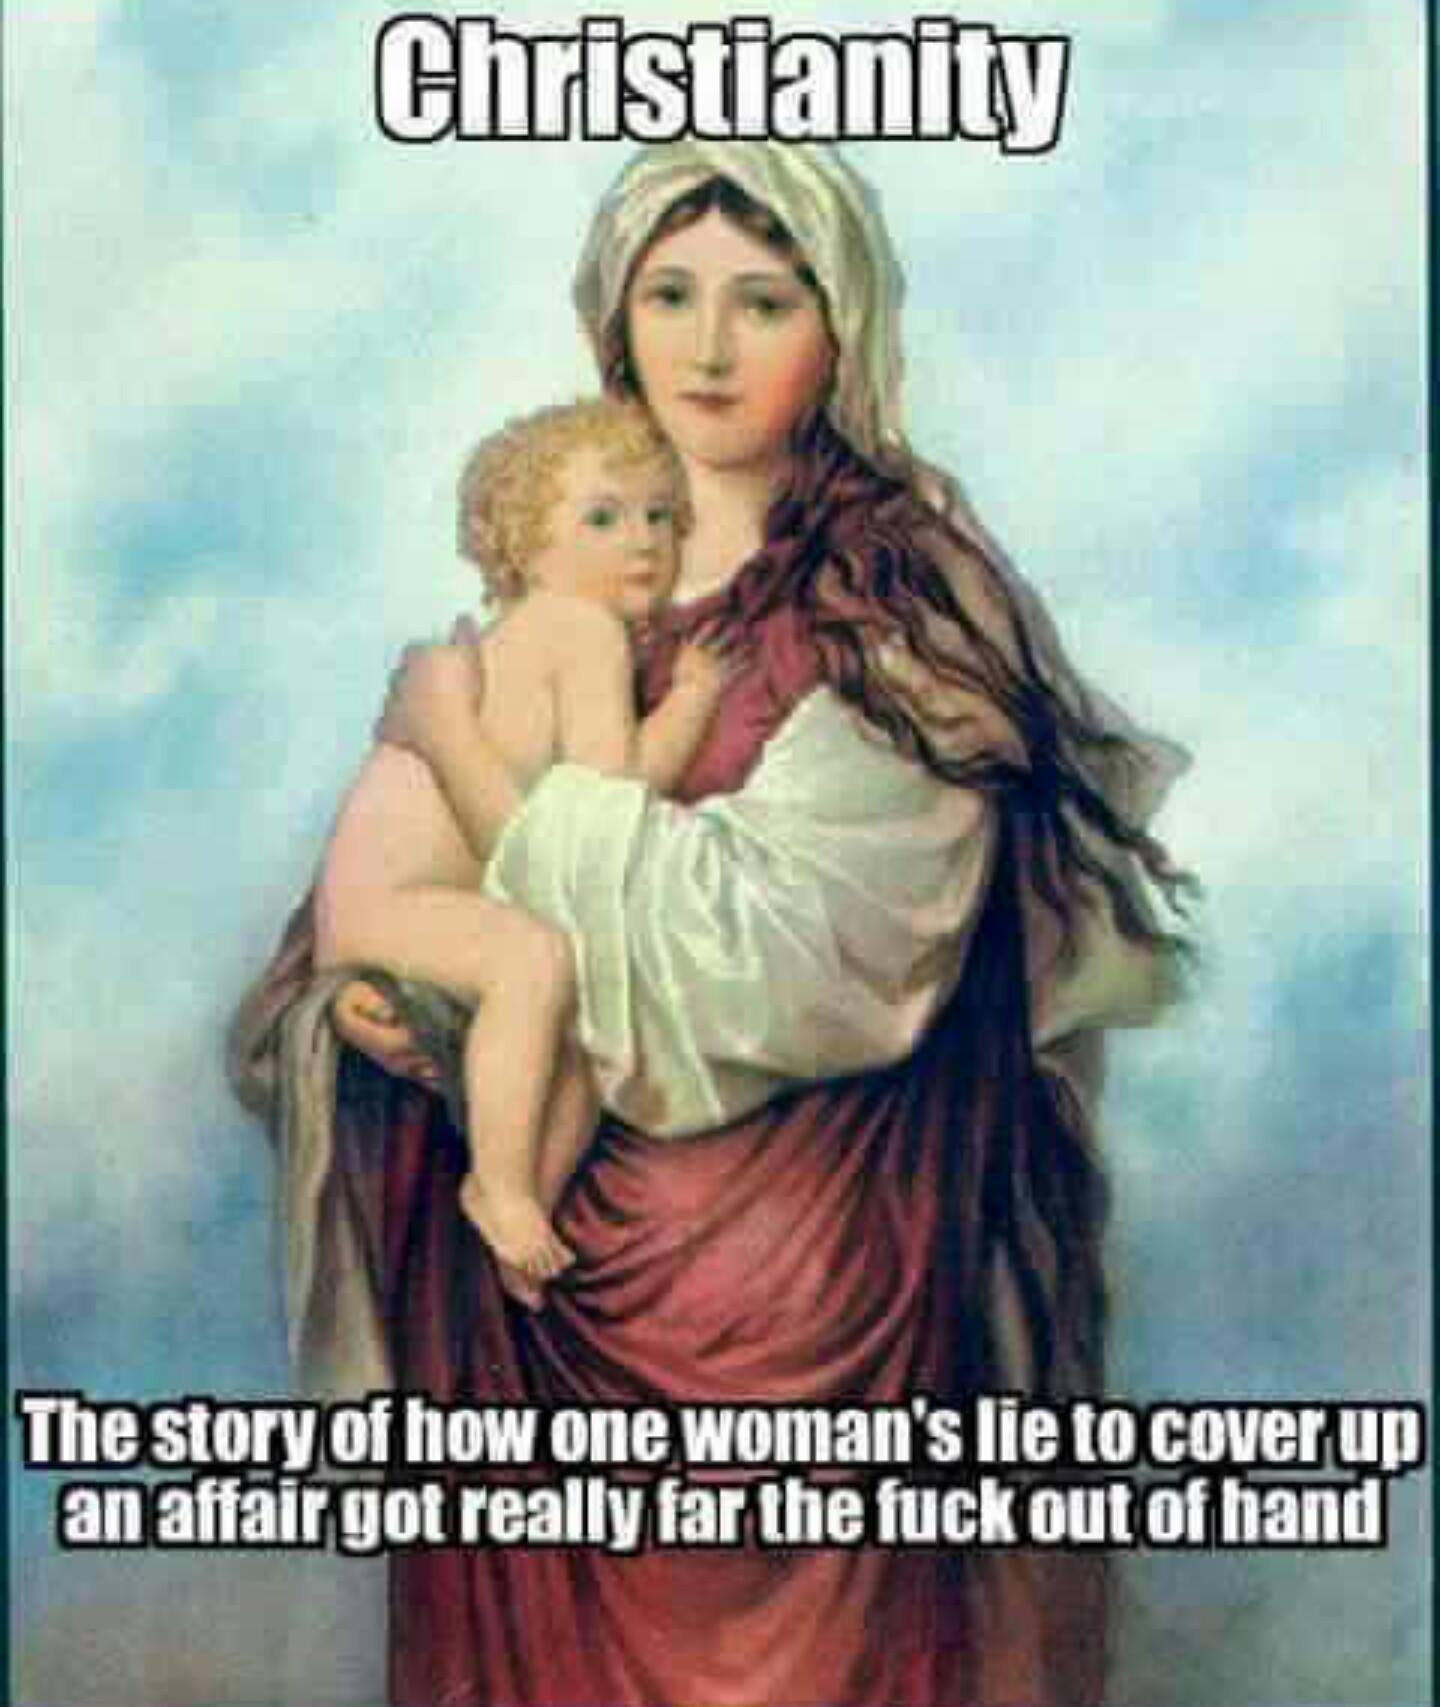 christianity is the story of how one woman's lie to cover up an affair got really far the fuck out of hand